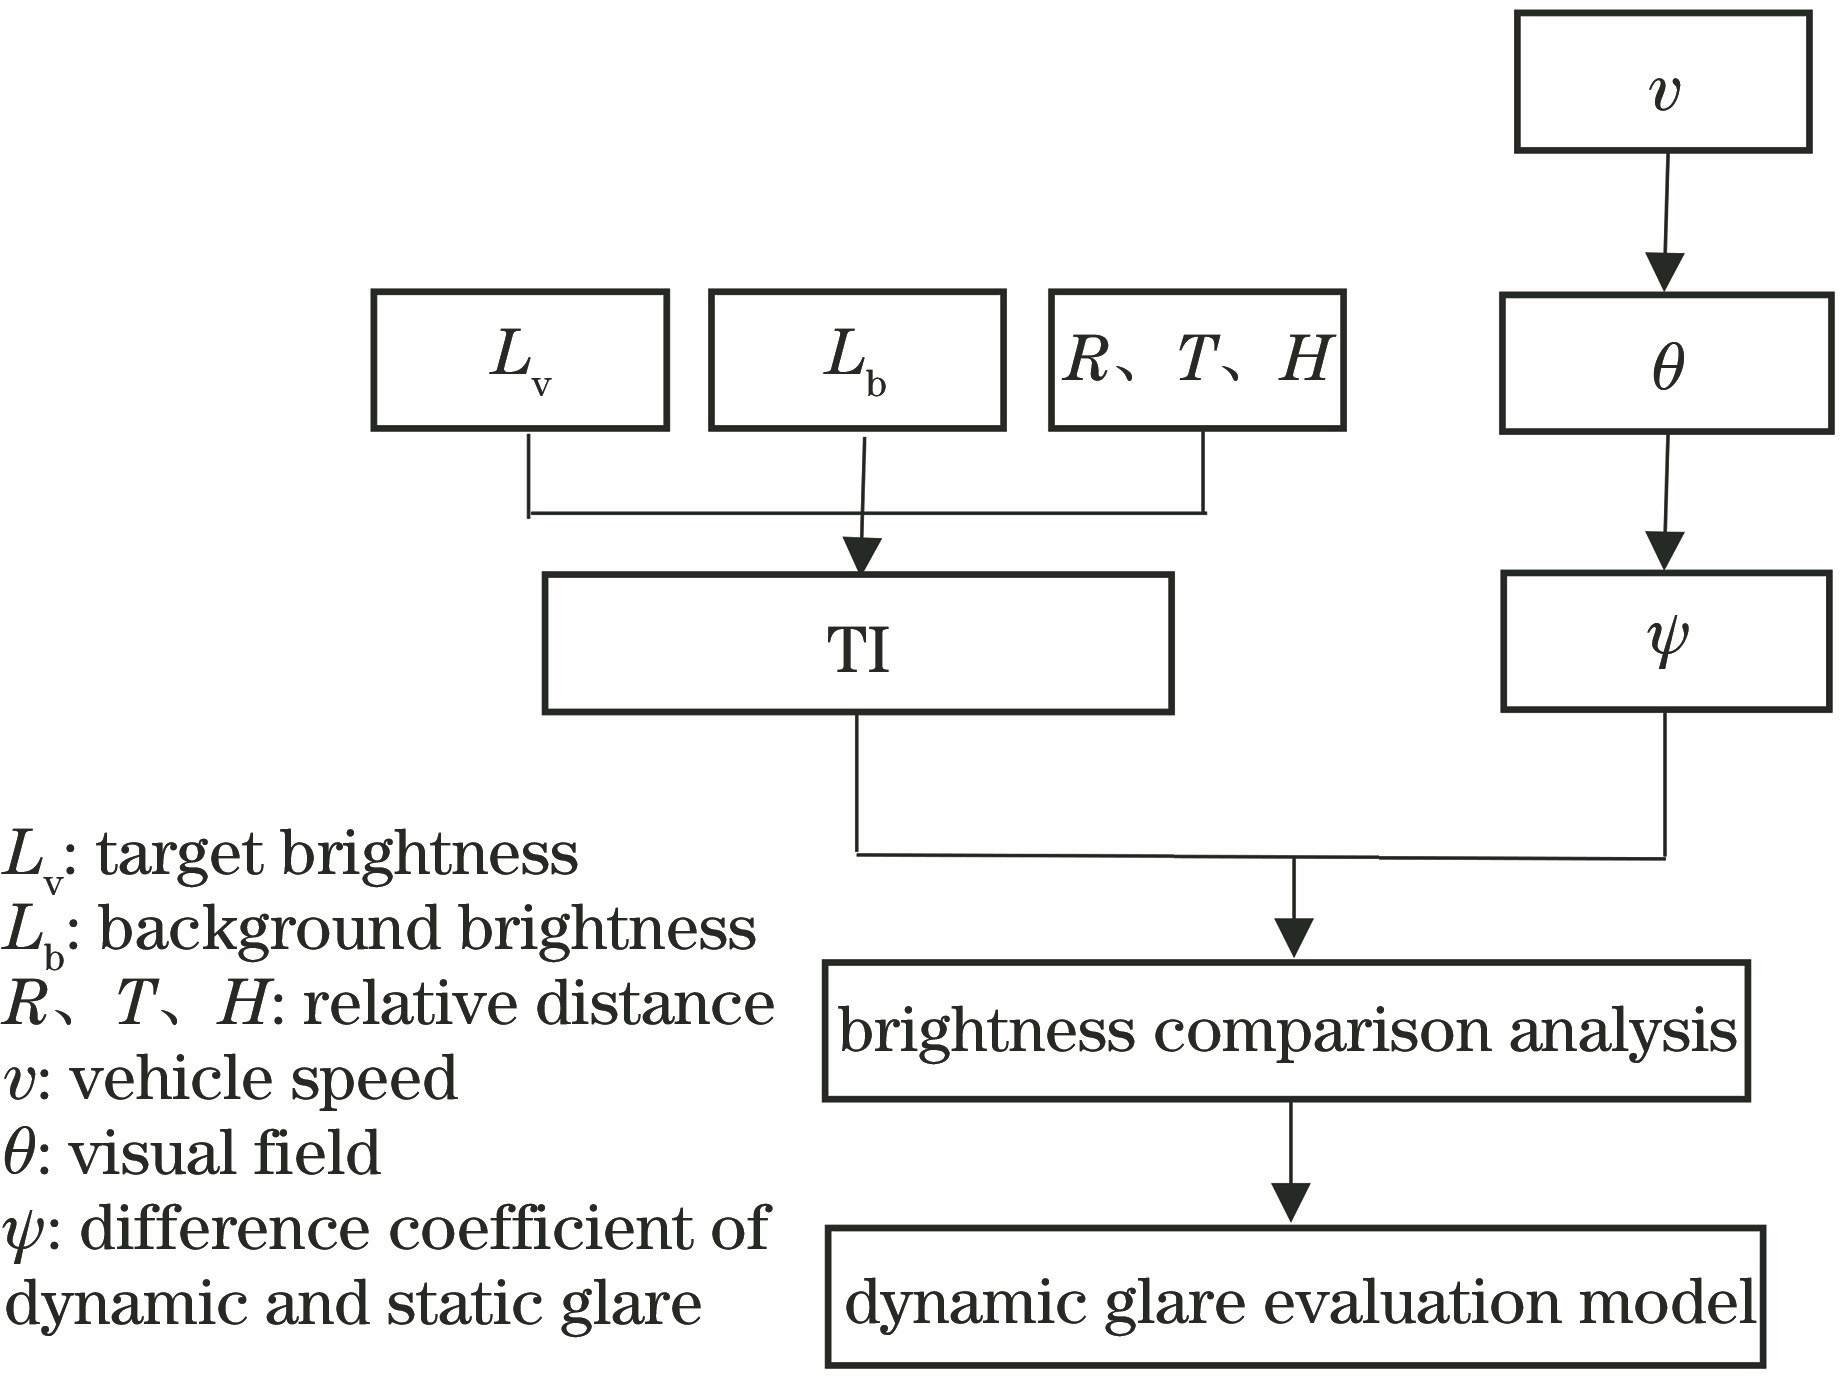 Block diagram of technical route of dynamic glare evaluation model